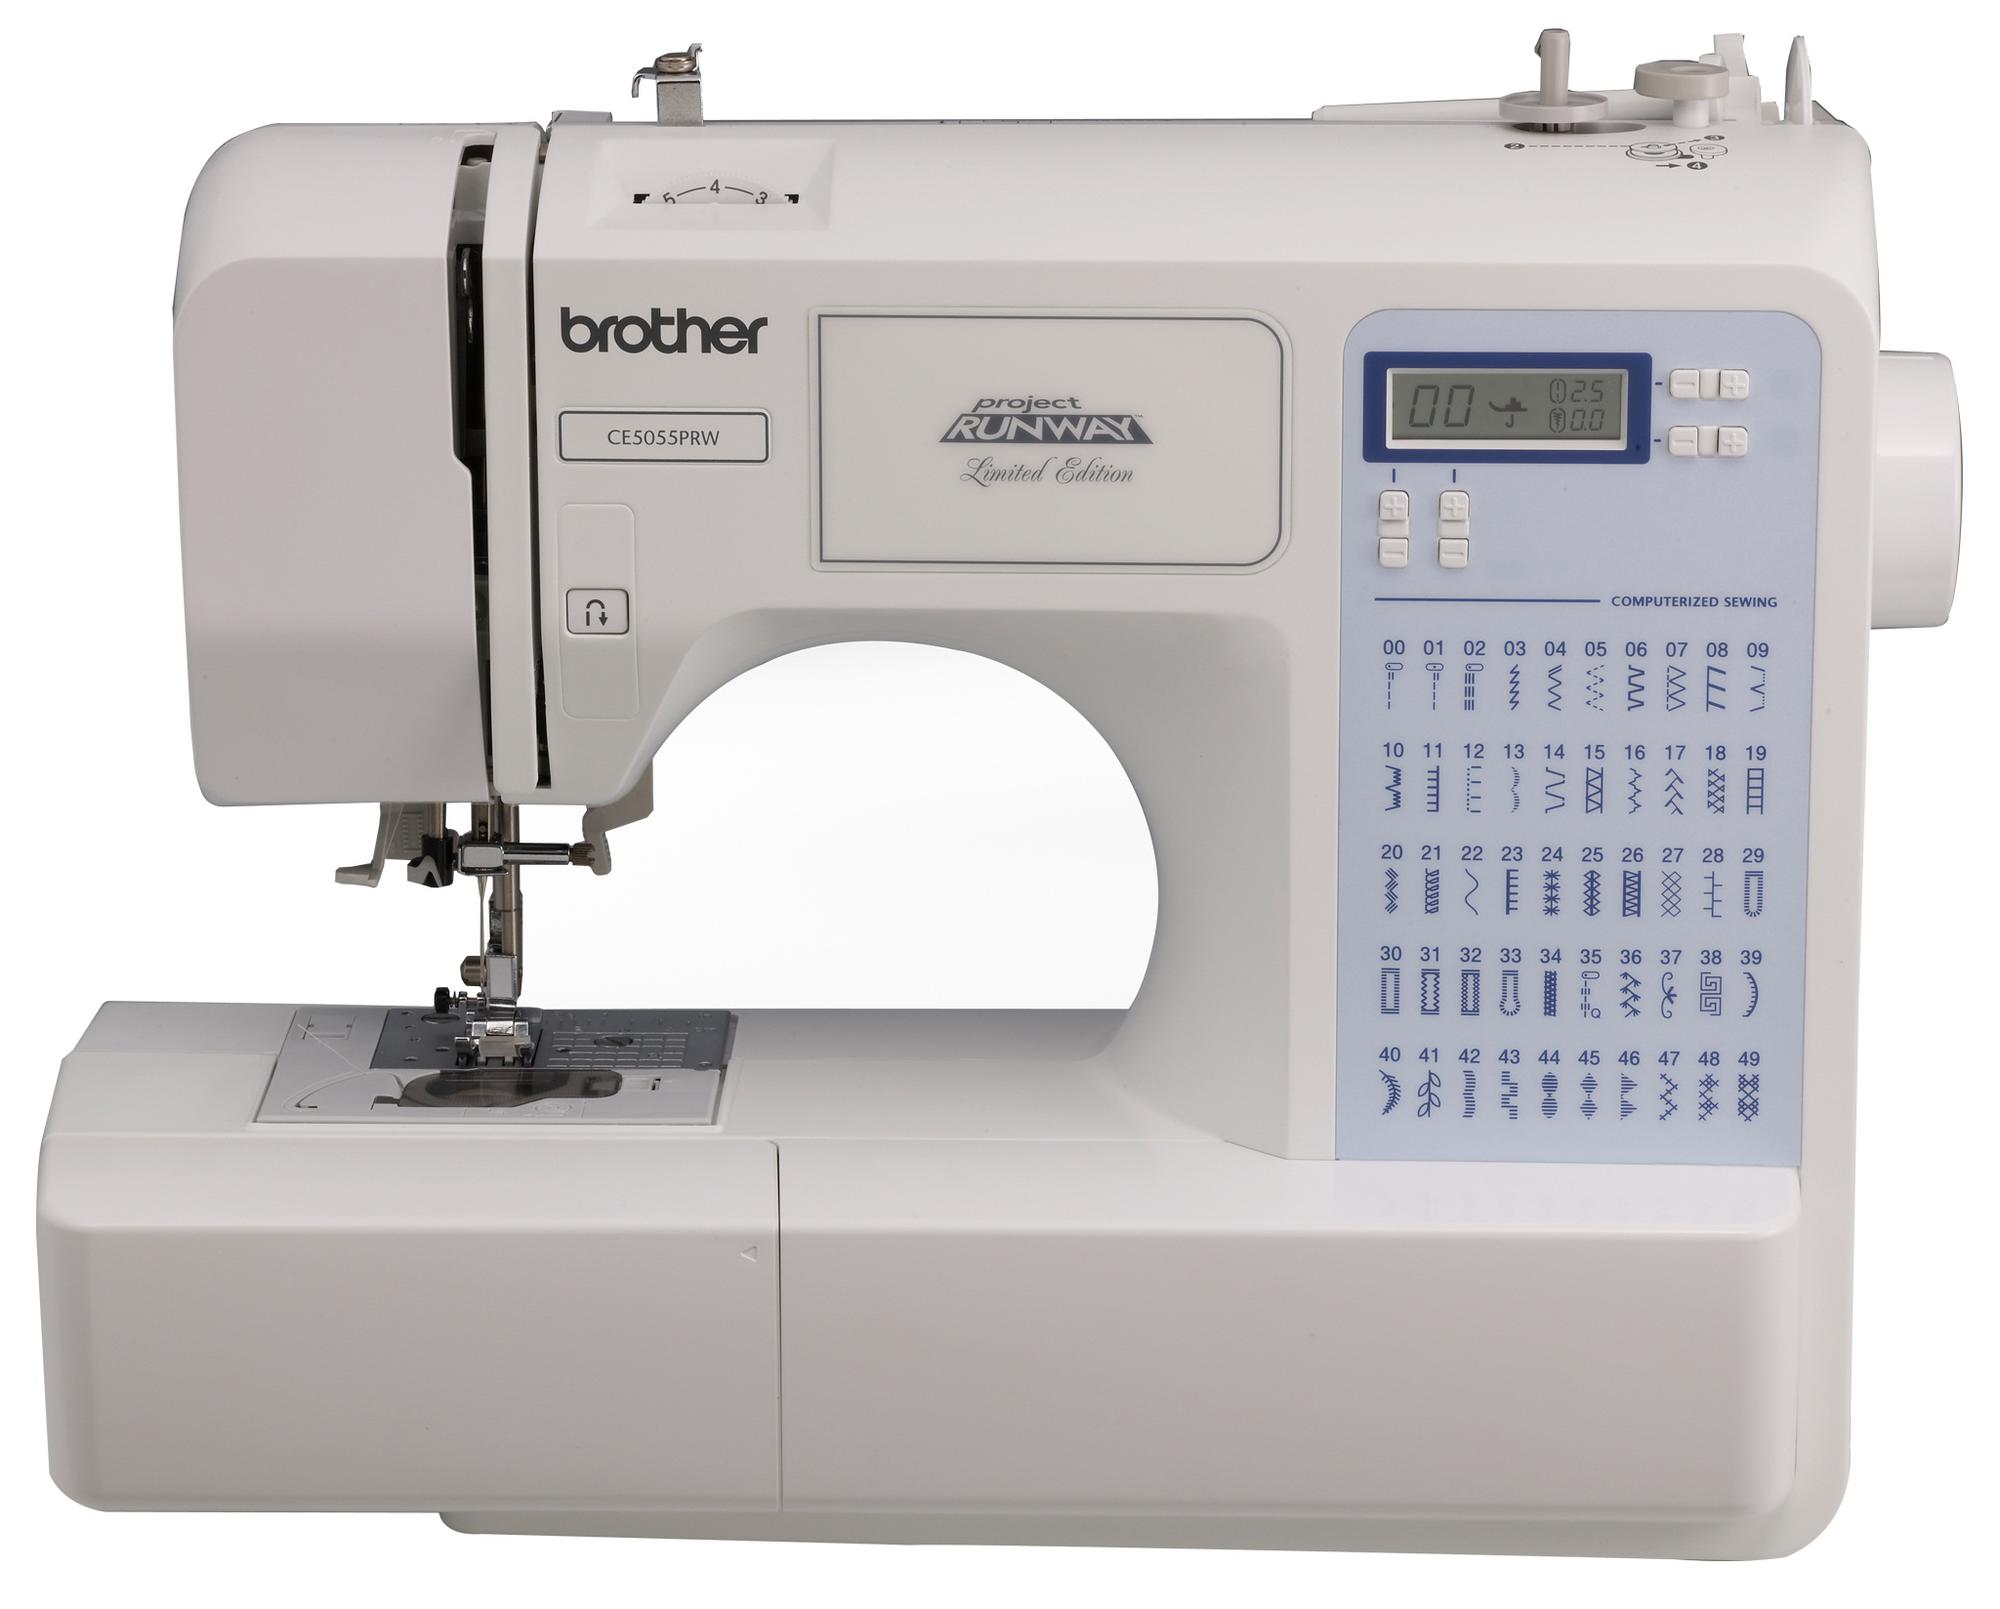 brothers limited edition project runway sewing machine